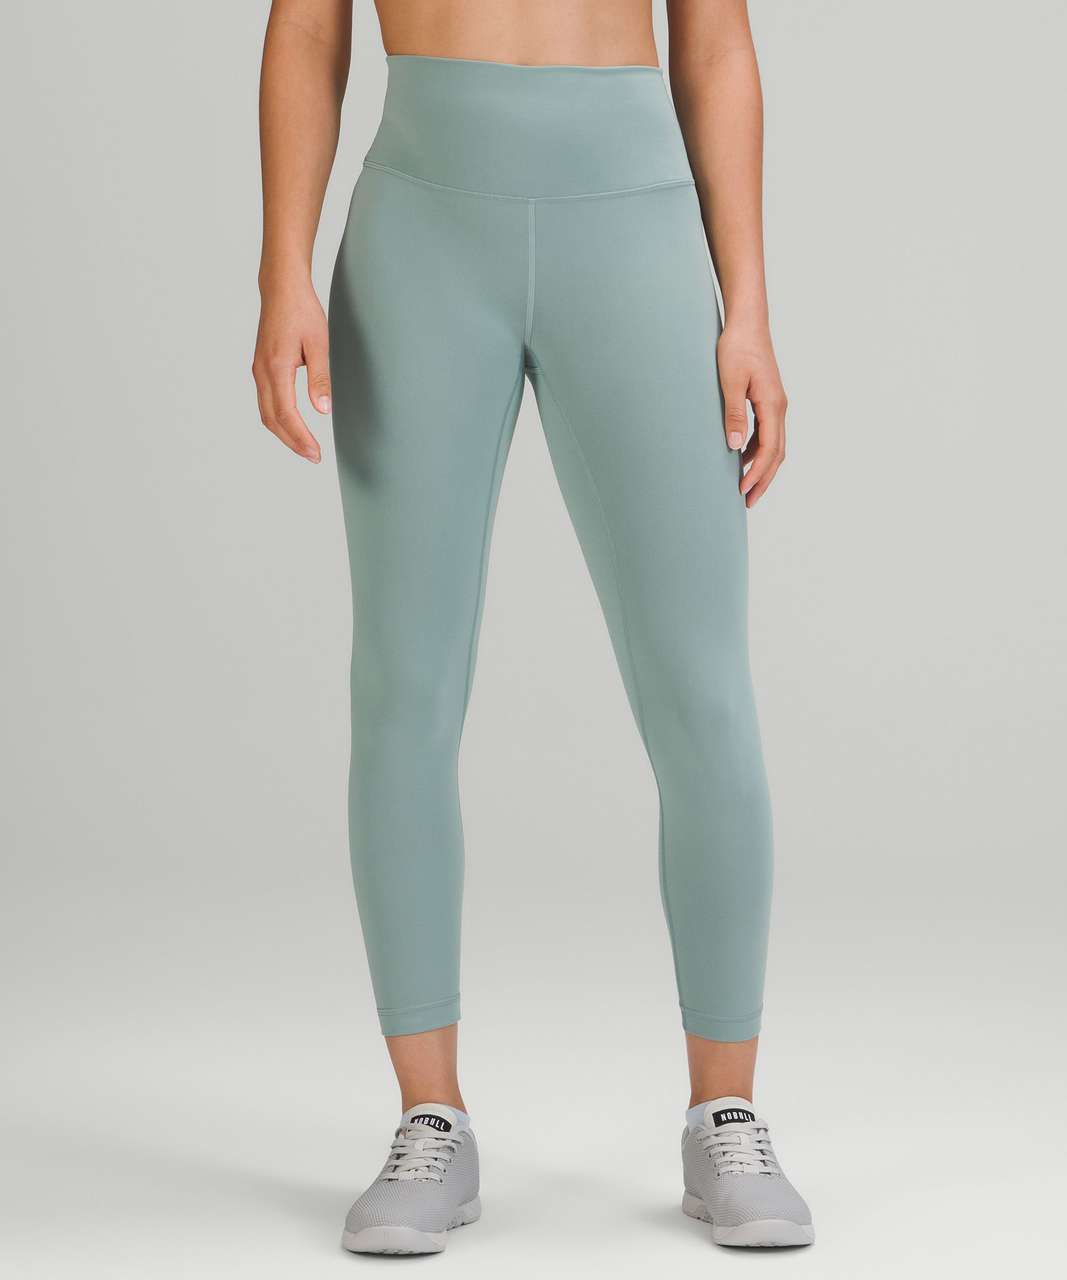 Obsessed with Misty Glade Wunder Train (8) and White Opal POCC (6)!  Heathered Rover Align Tank (8) underneath. Wish they'd offer more items in  all of these colors! : r/lululemon